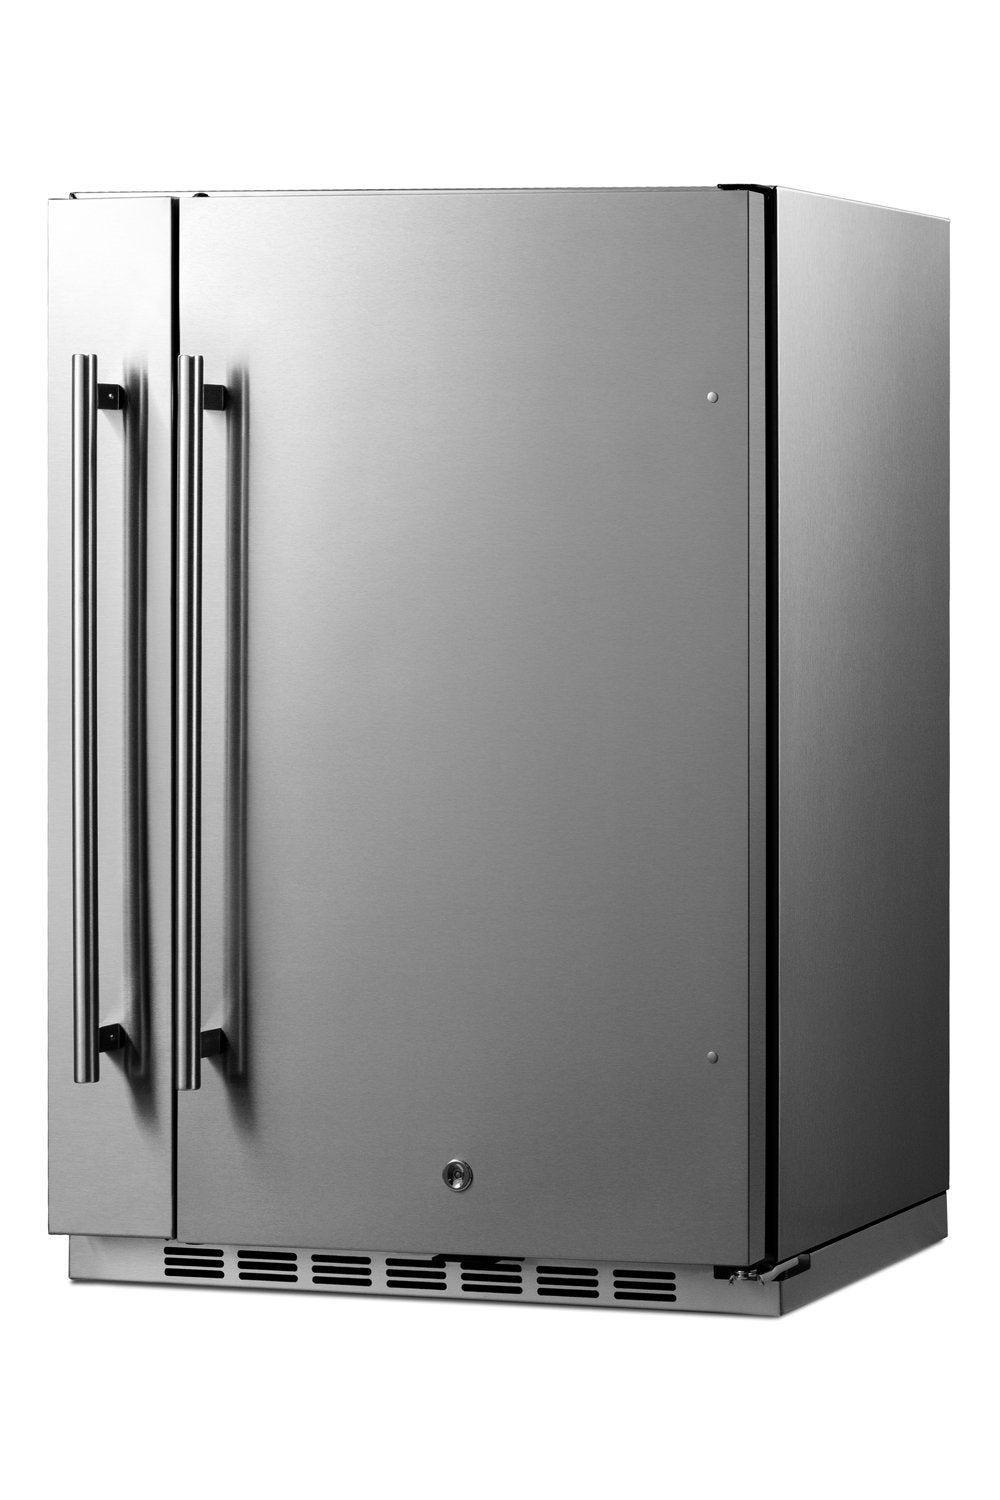 SUMMIT Shallow Depth 24 in. Outdoor Built-In Freezerless Refrigerator With Slide-Out Storage Compartment (SPR196OS24)